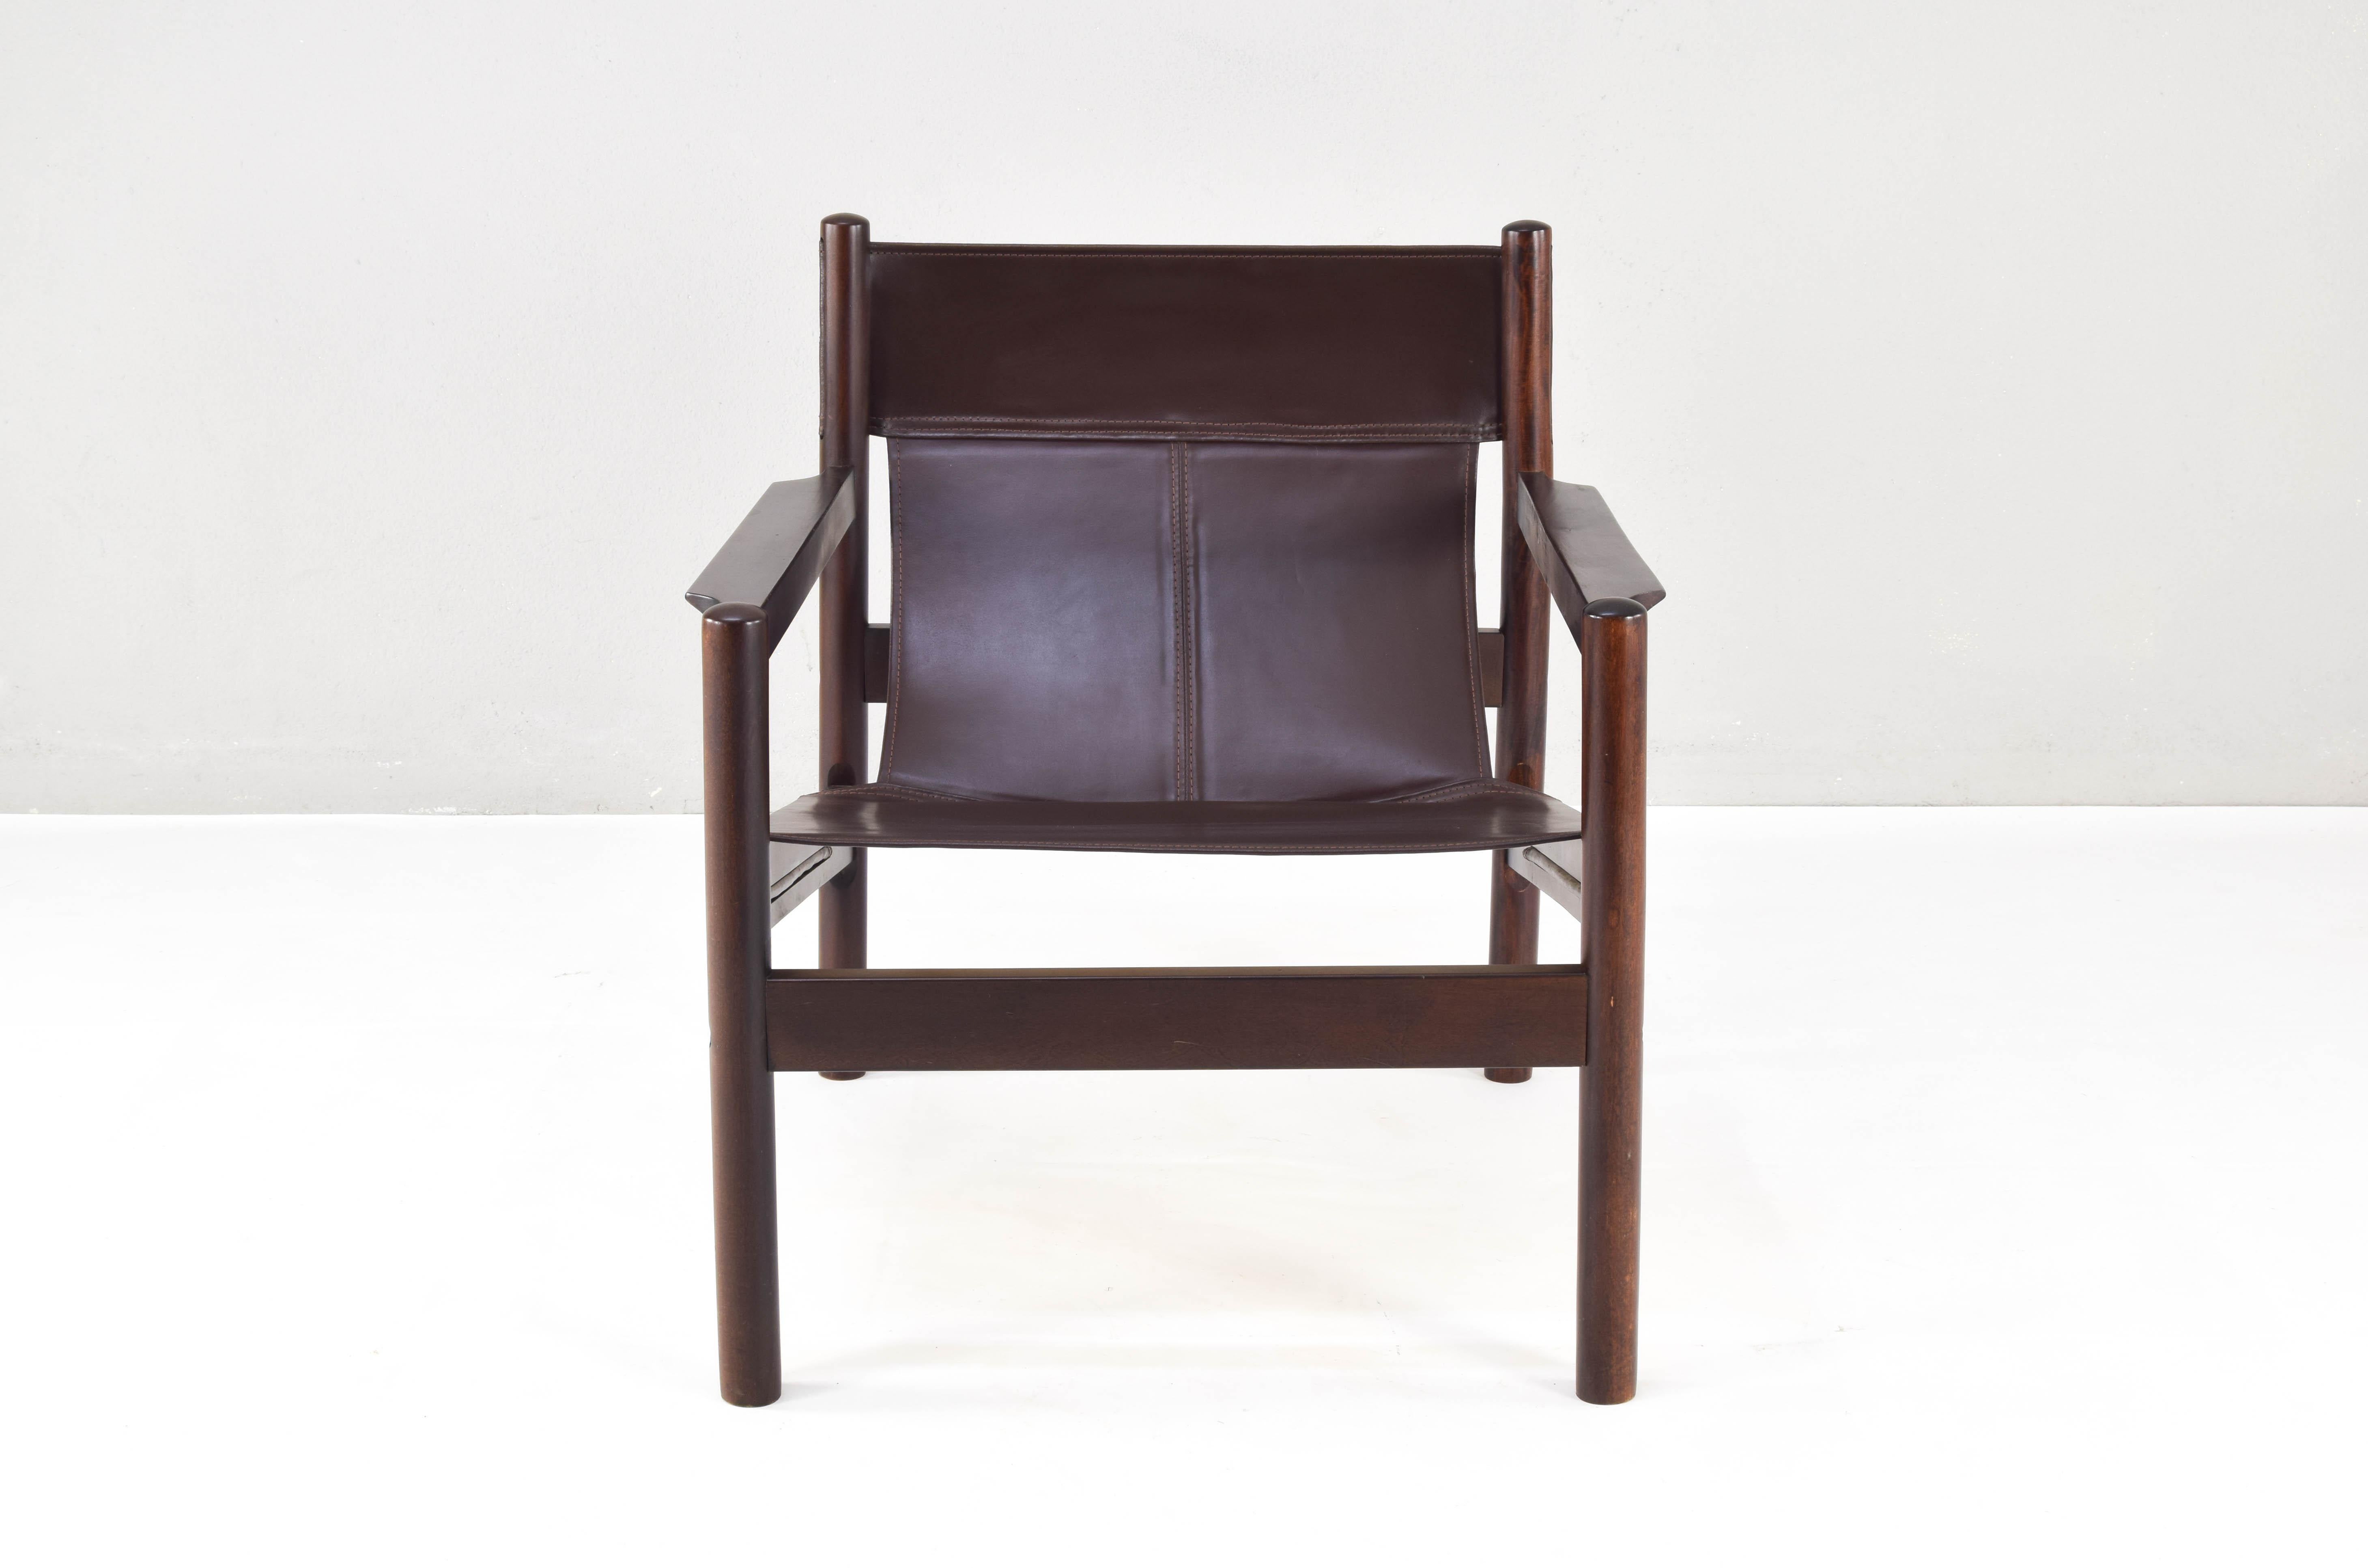 Roxinho sling mid century Safari style armchair made in Brazilian wood and leather. Designed by Michel Arnoult in the 1960s, this edition was made in Argentina. They have stitched leather upholstery and a hardwood frame.
Refined and casual